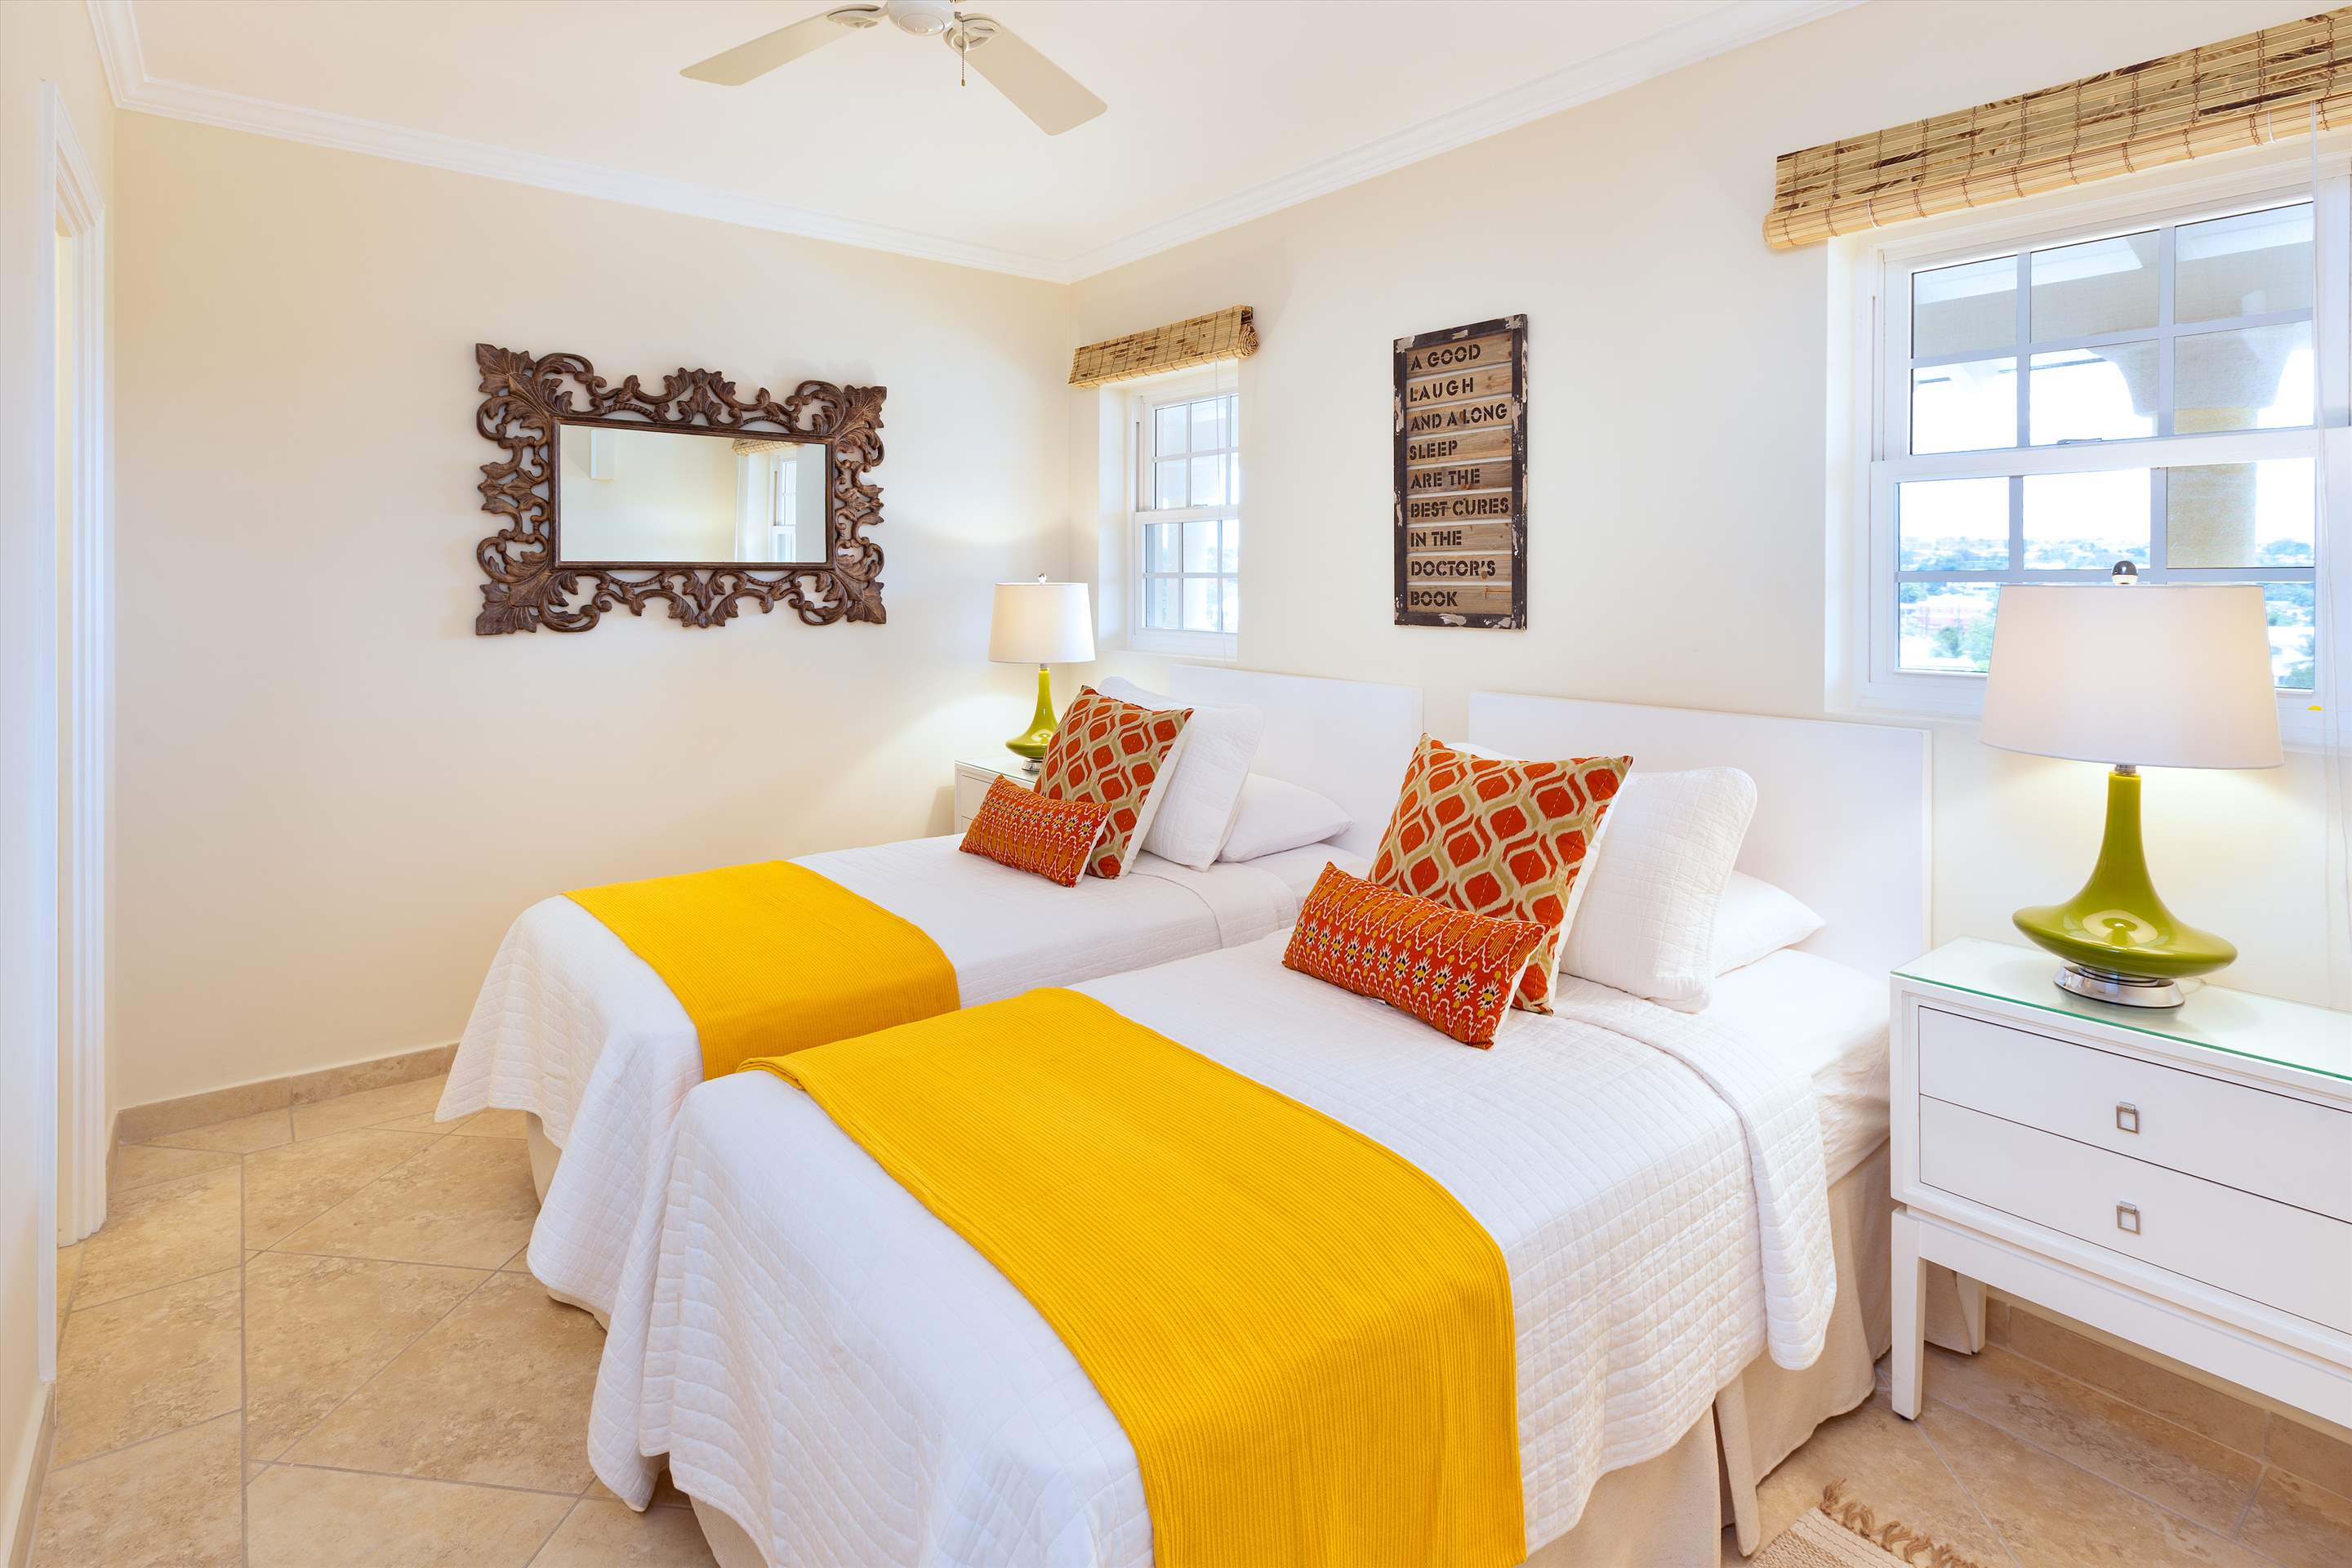 Sapphire Beach 517, 2 bedroom, 3 bedroom apartment in St. Lawrence Gap & South Coast, Barbados Photo #10